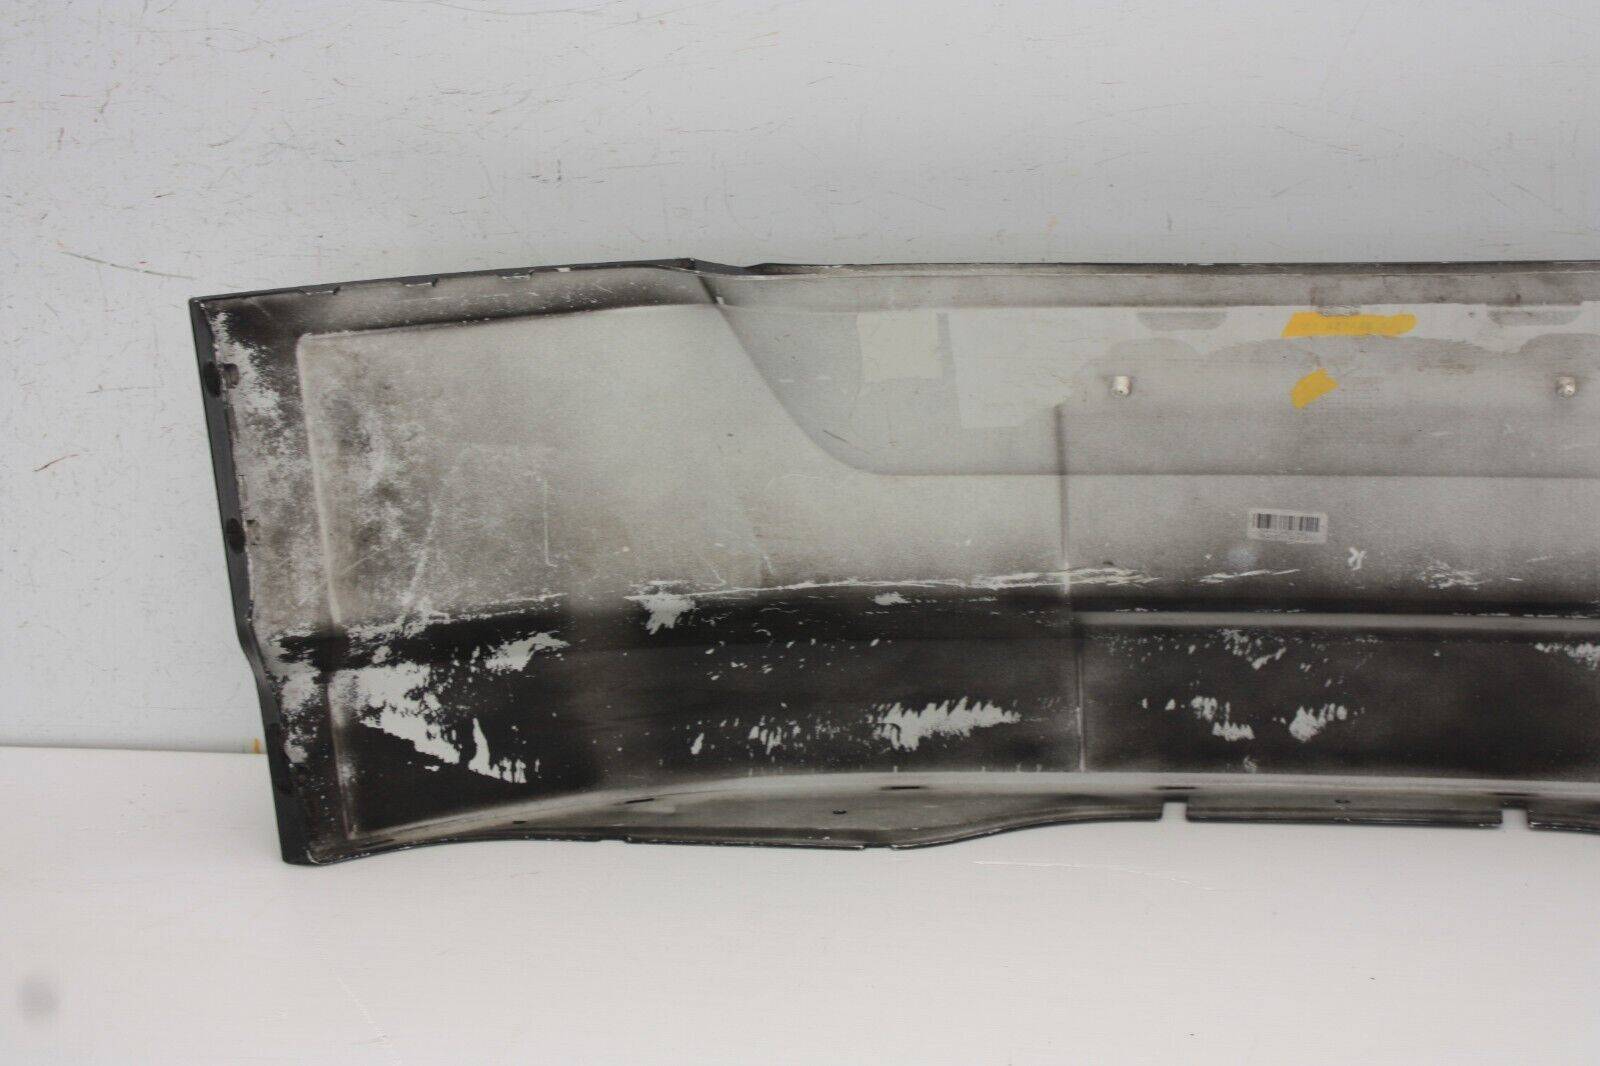 Ford-S-Max-Tailgate-Boot-Lid-Lower-Section-2010-TO-2015-AM21-423A40-AH-Genuine-175665504613-11